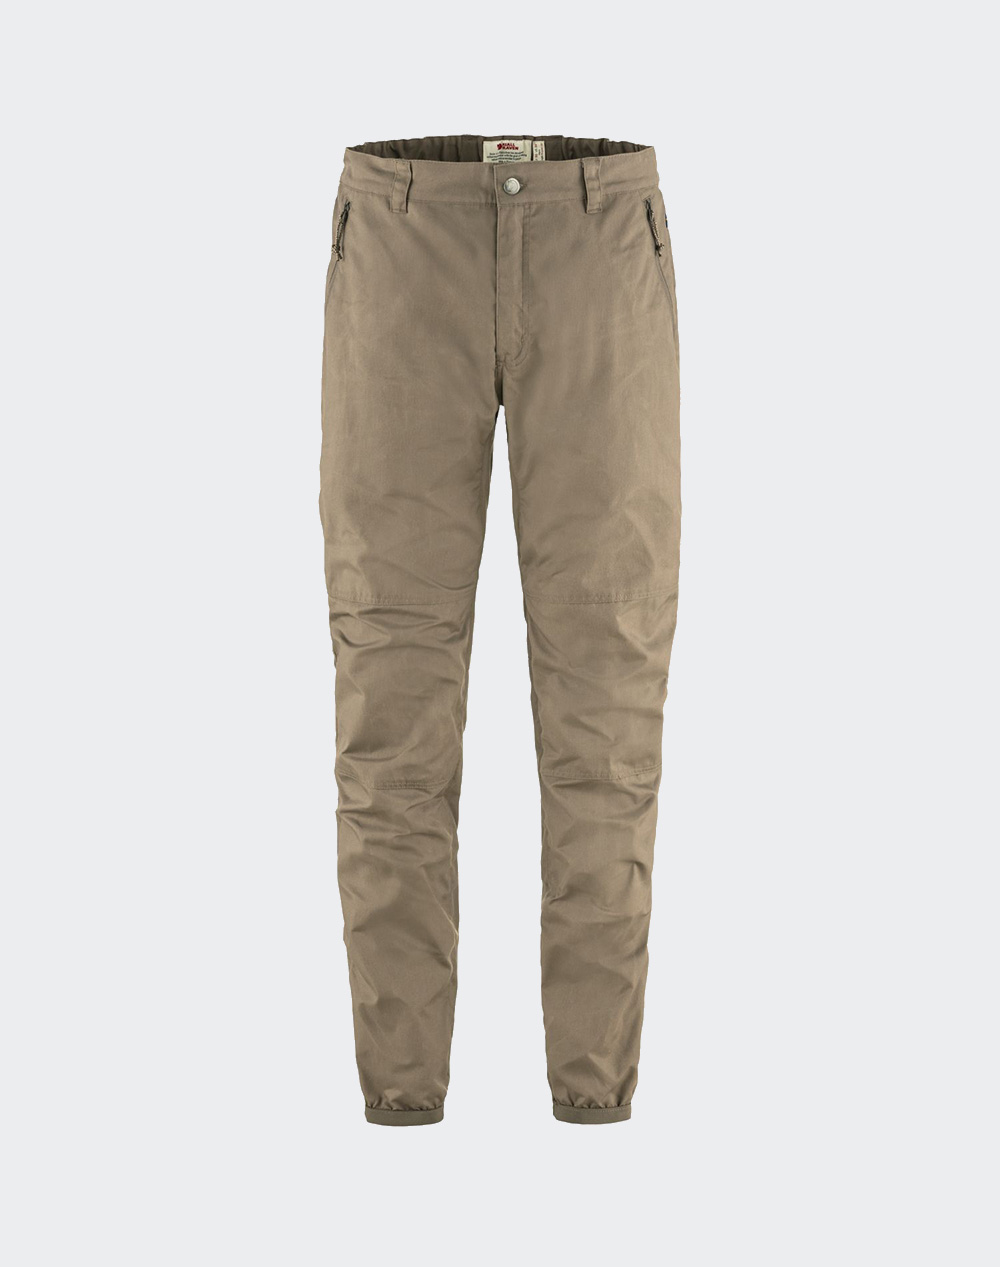 FJALLRAVEN Everyday Trousers M / Everyday Trousers M